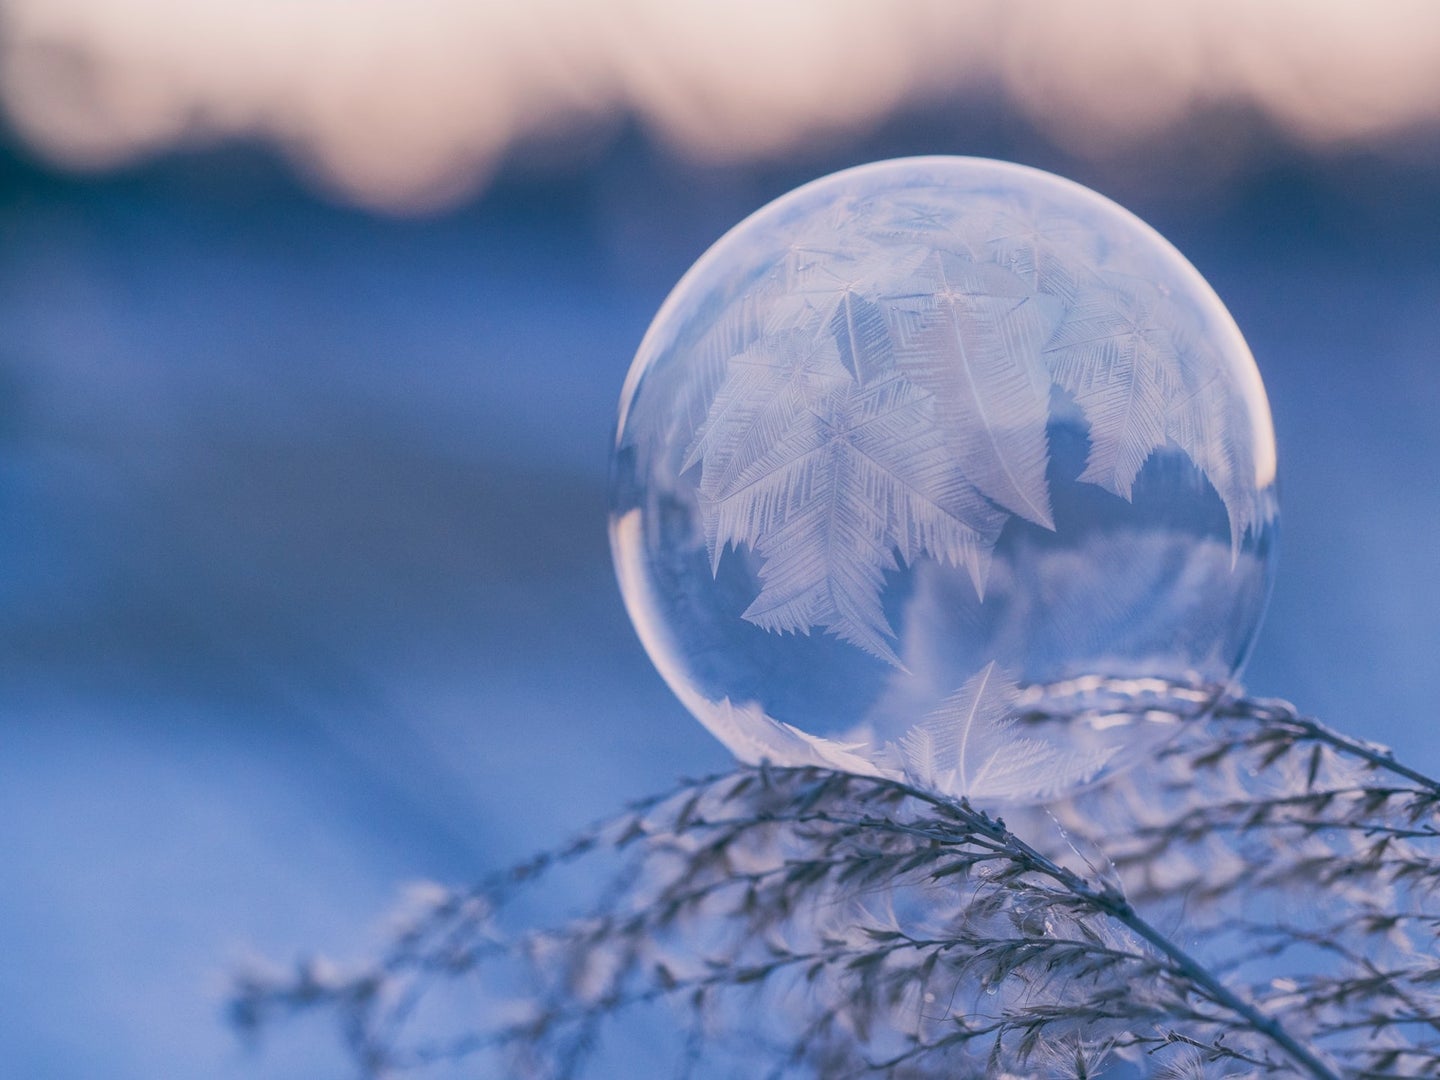 Frozen bubble on a snowy branch during winter solstice